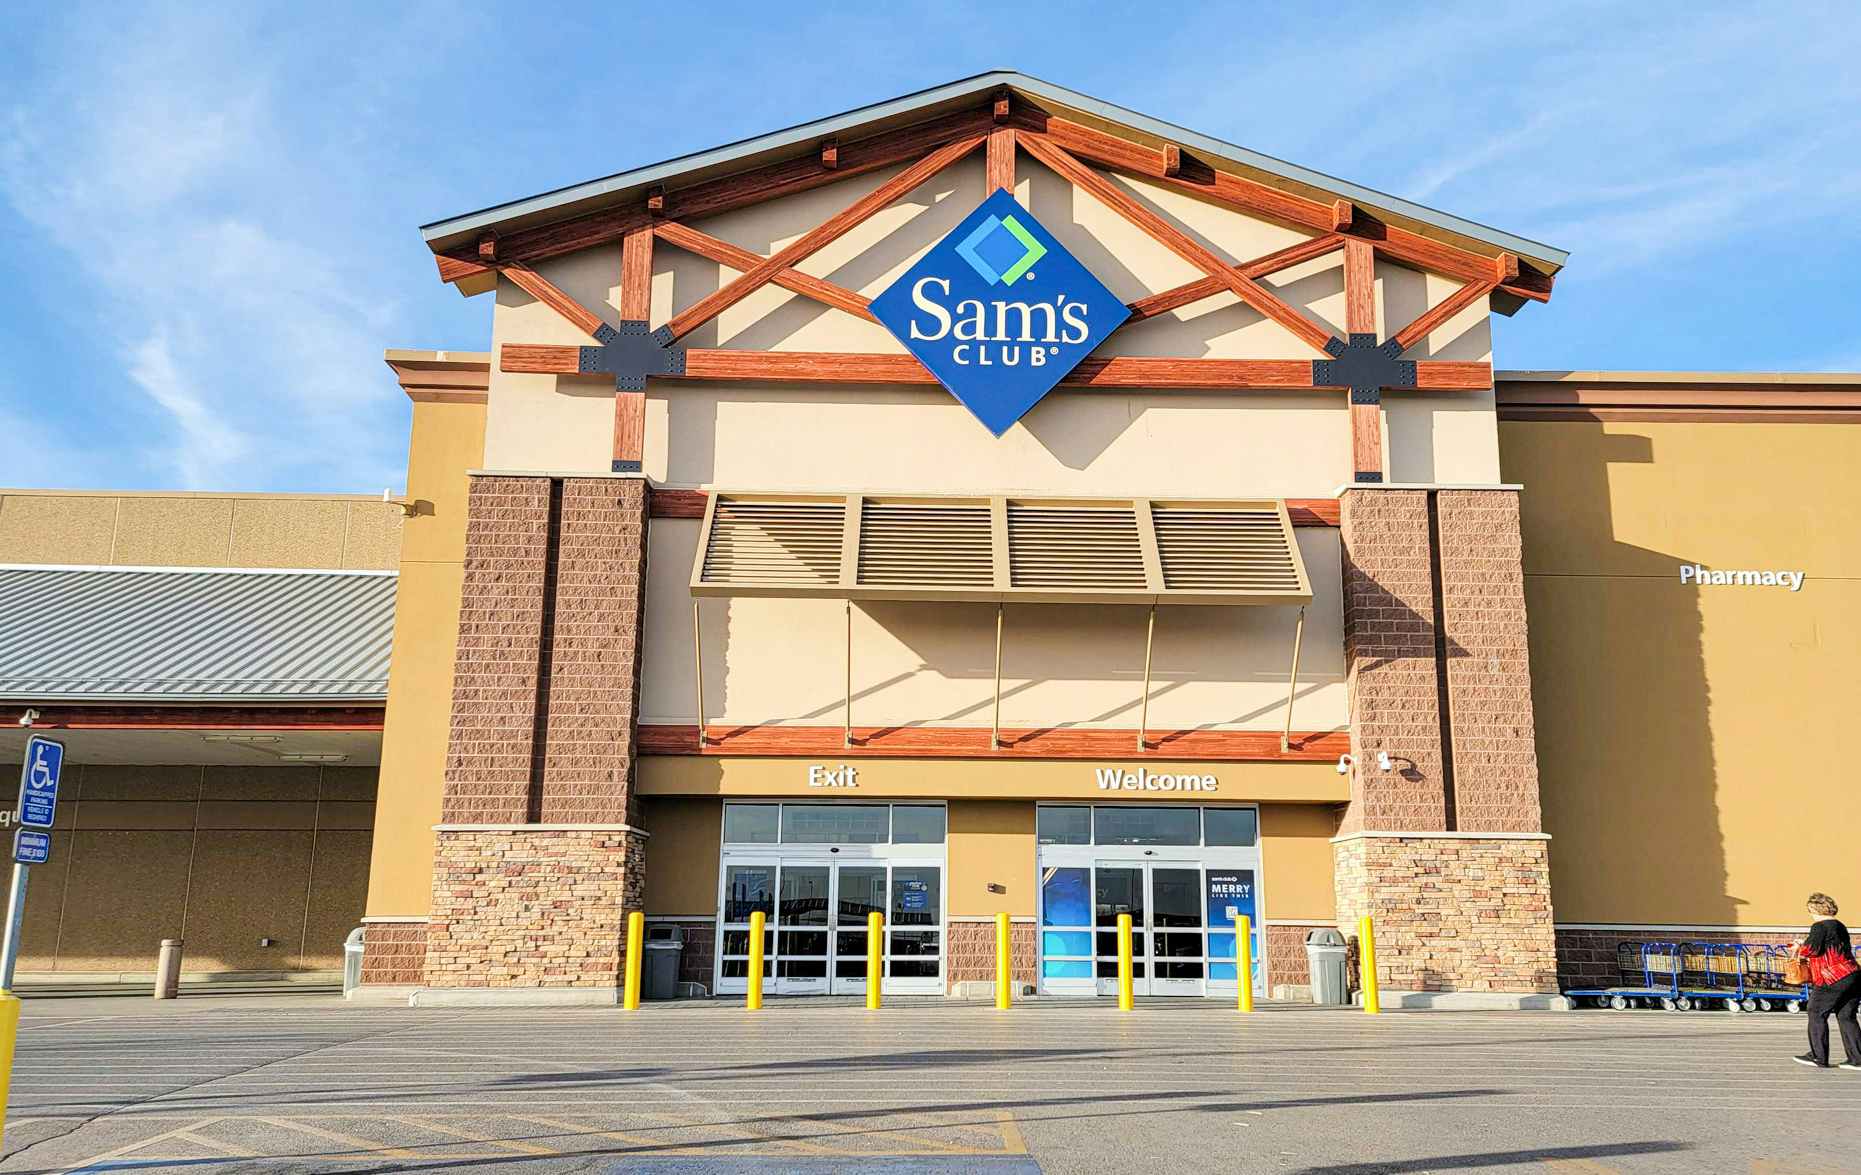 Stop by Sam's Club April 20 for a Birthday Celebration (And Free Samples)